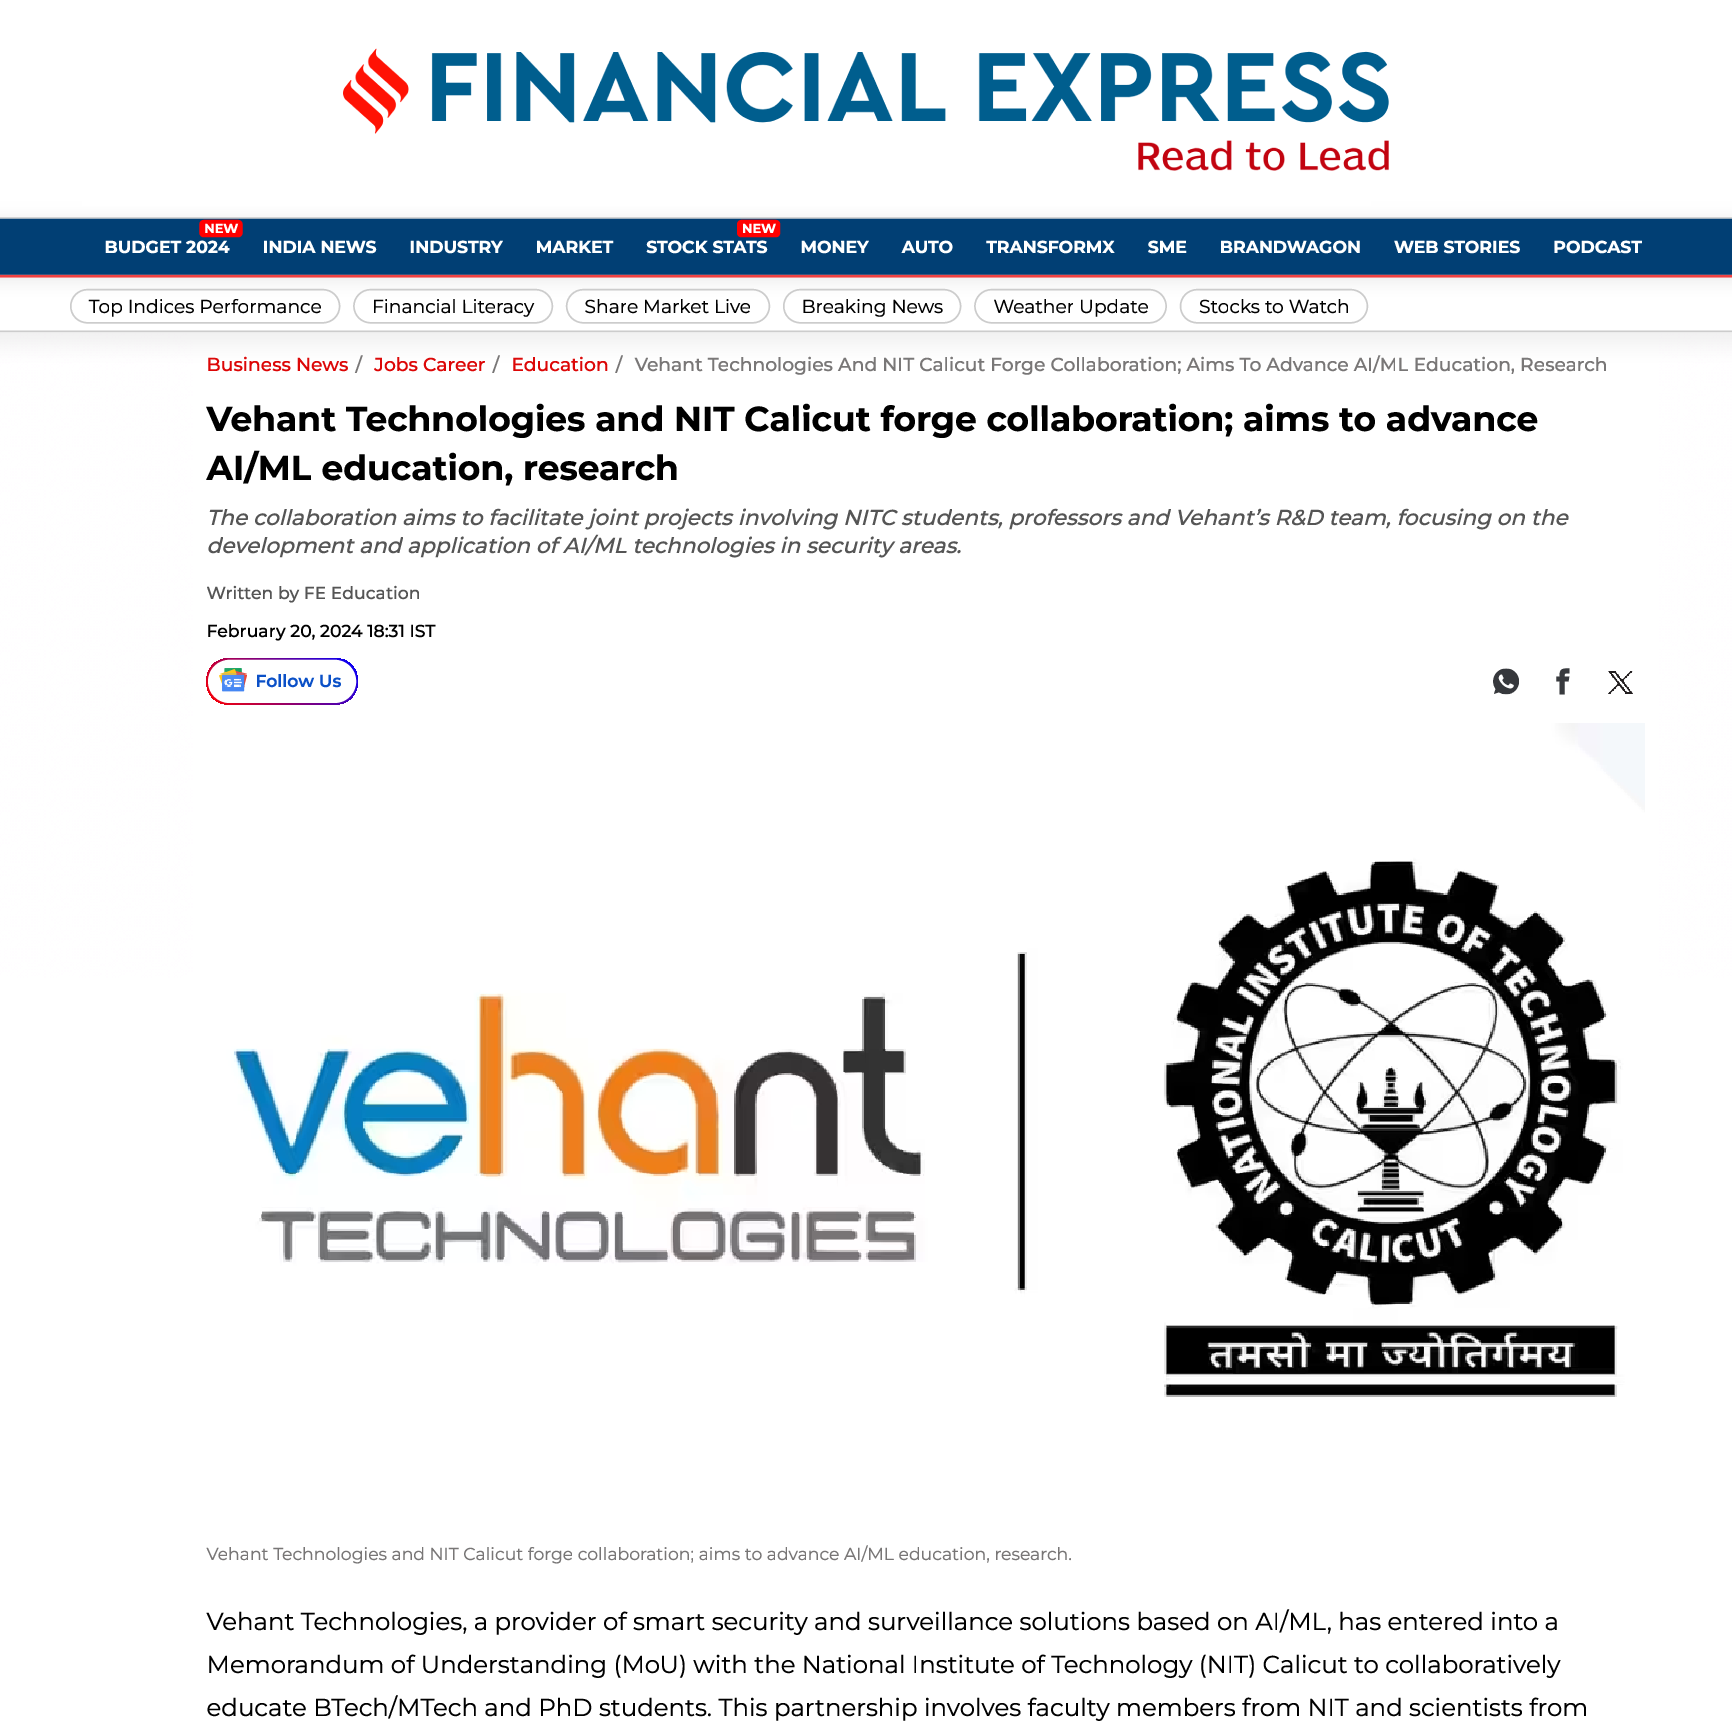 Vehant Technologies and NIT Calicut forge collaboration aims to advance AI/ML education research